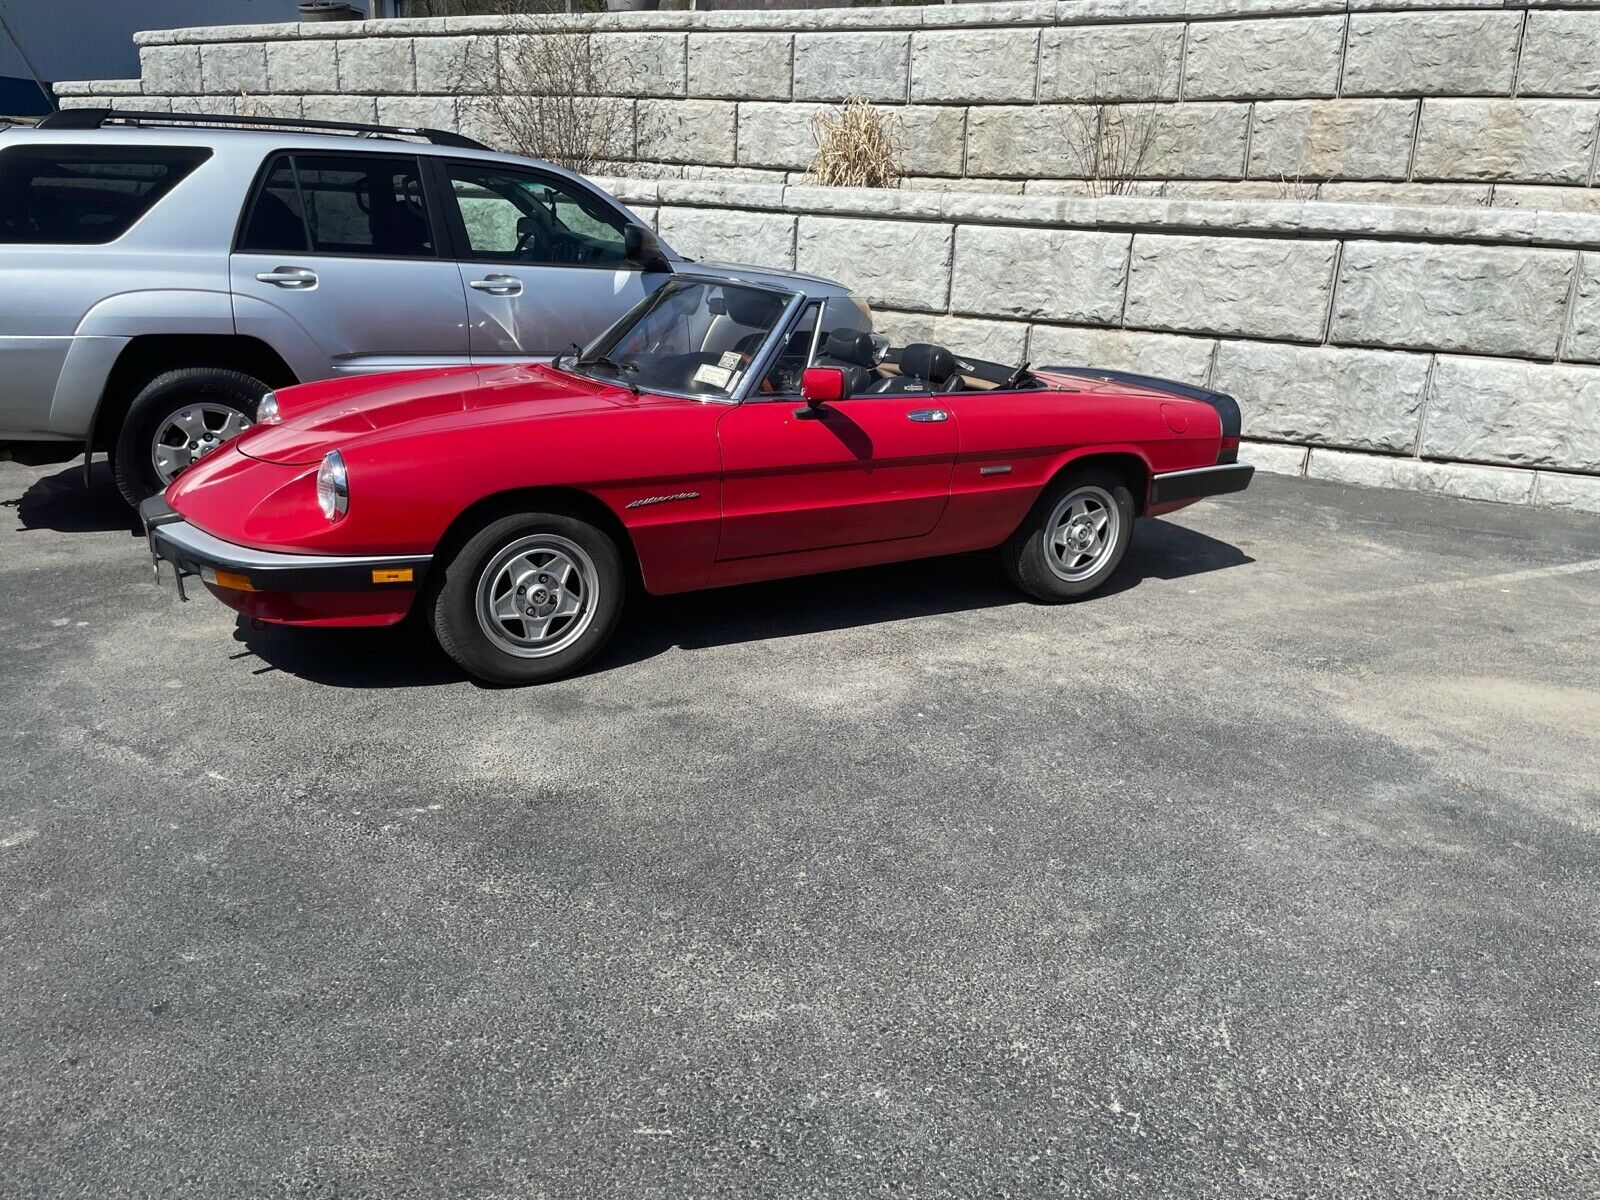 1986 Alfa Romeo Spider 2000 Spider 1986 Alfa Romeo Spider Convertible Red Rwd Manual 2000 Spider